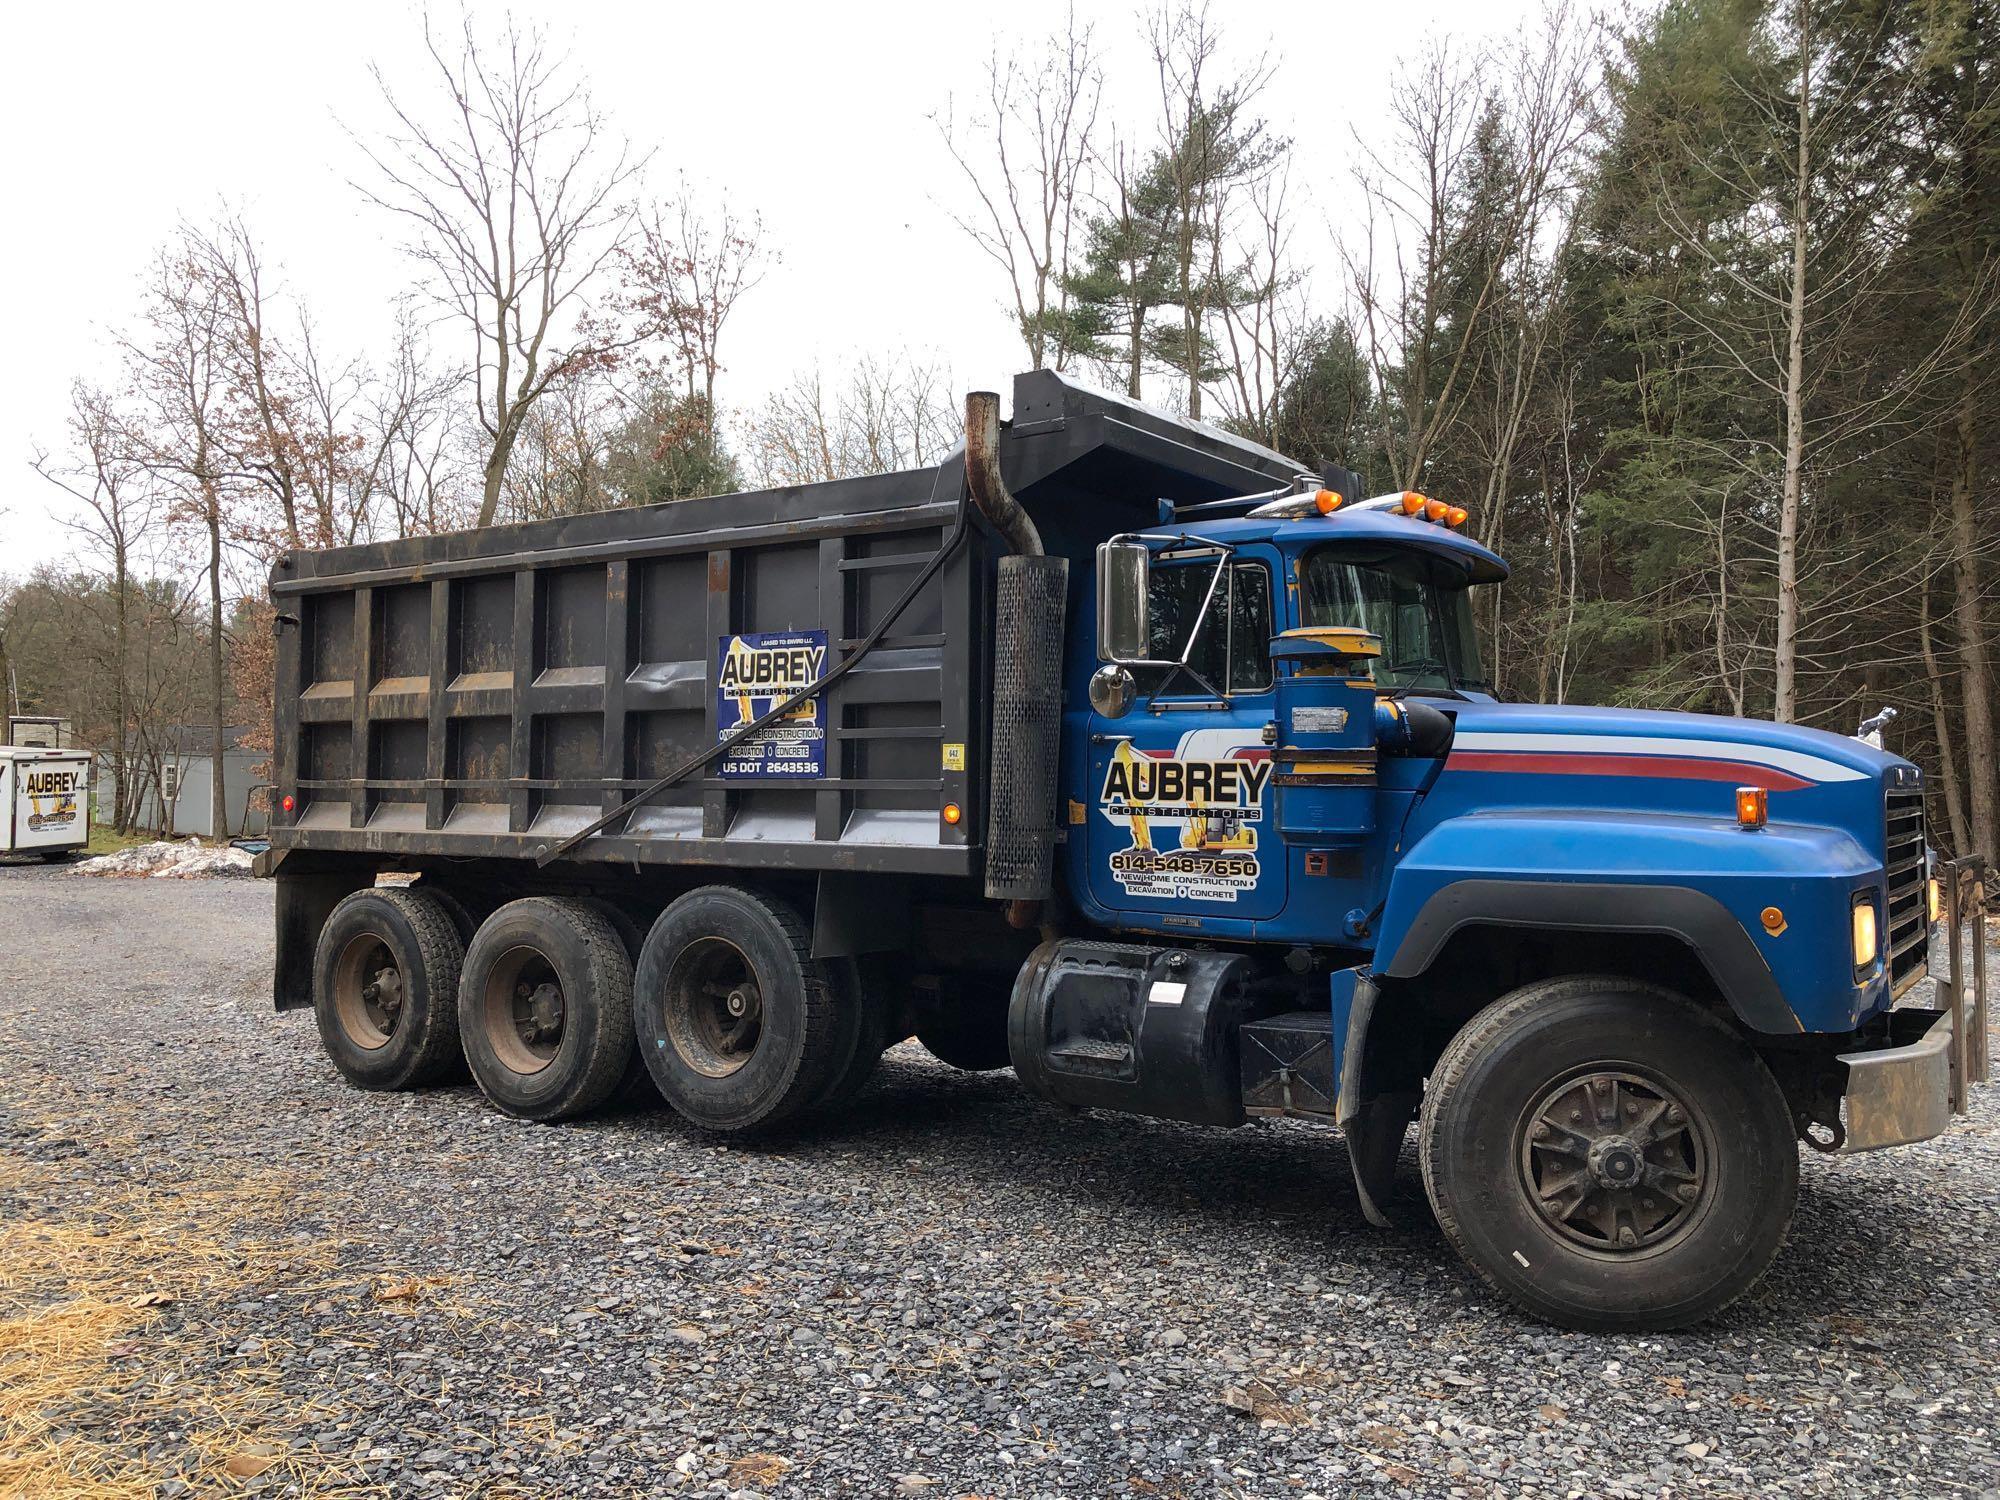 1995 MACK dump truck(Model 350-R690;new front drive tires;new lift cylinder;300610 miles;20096 hours